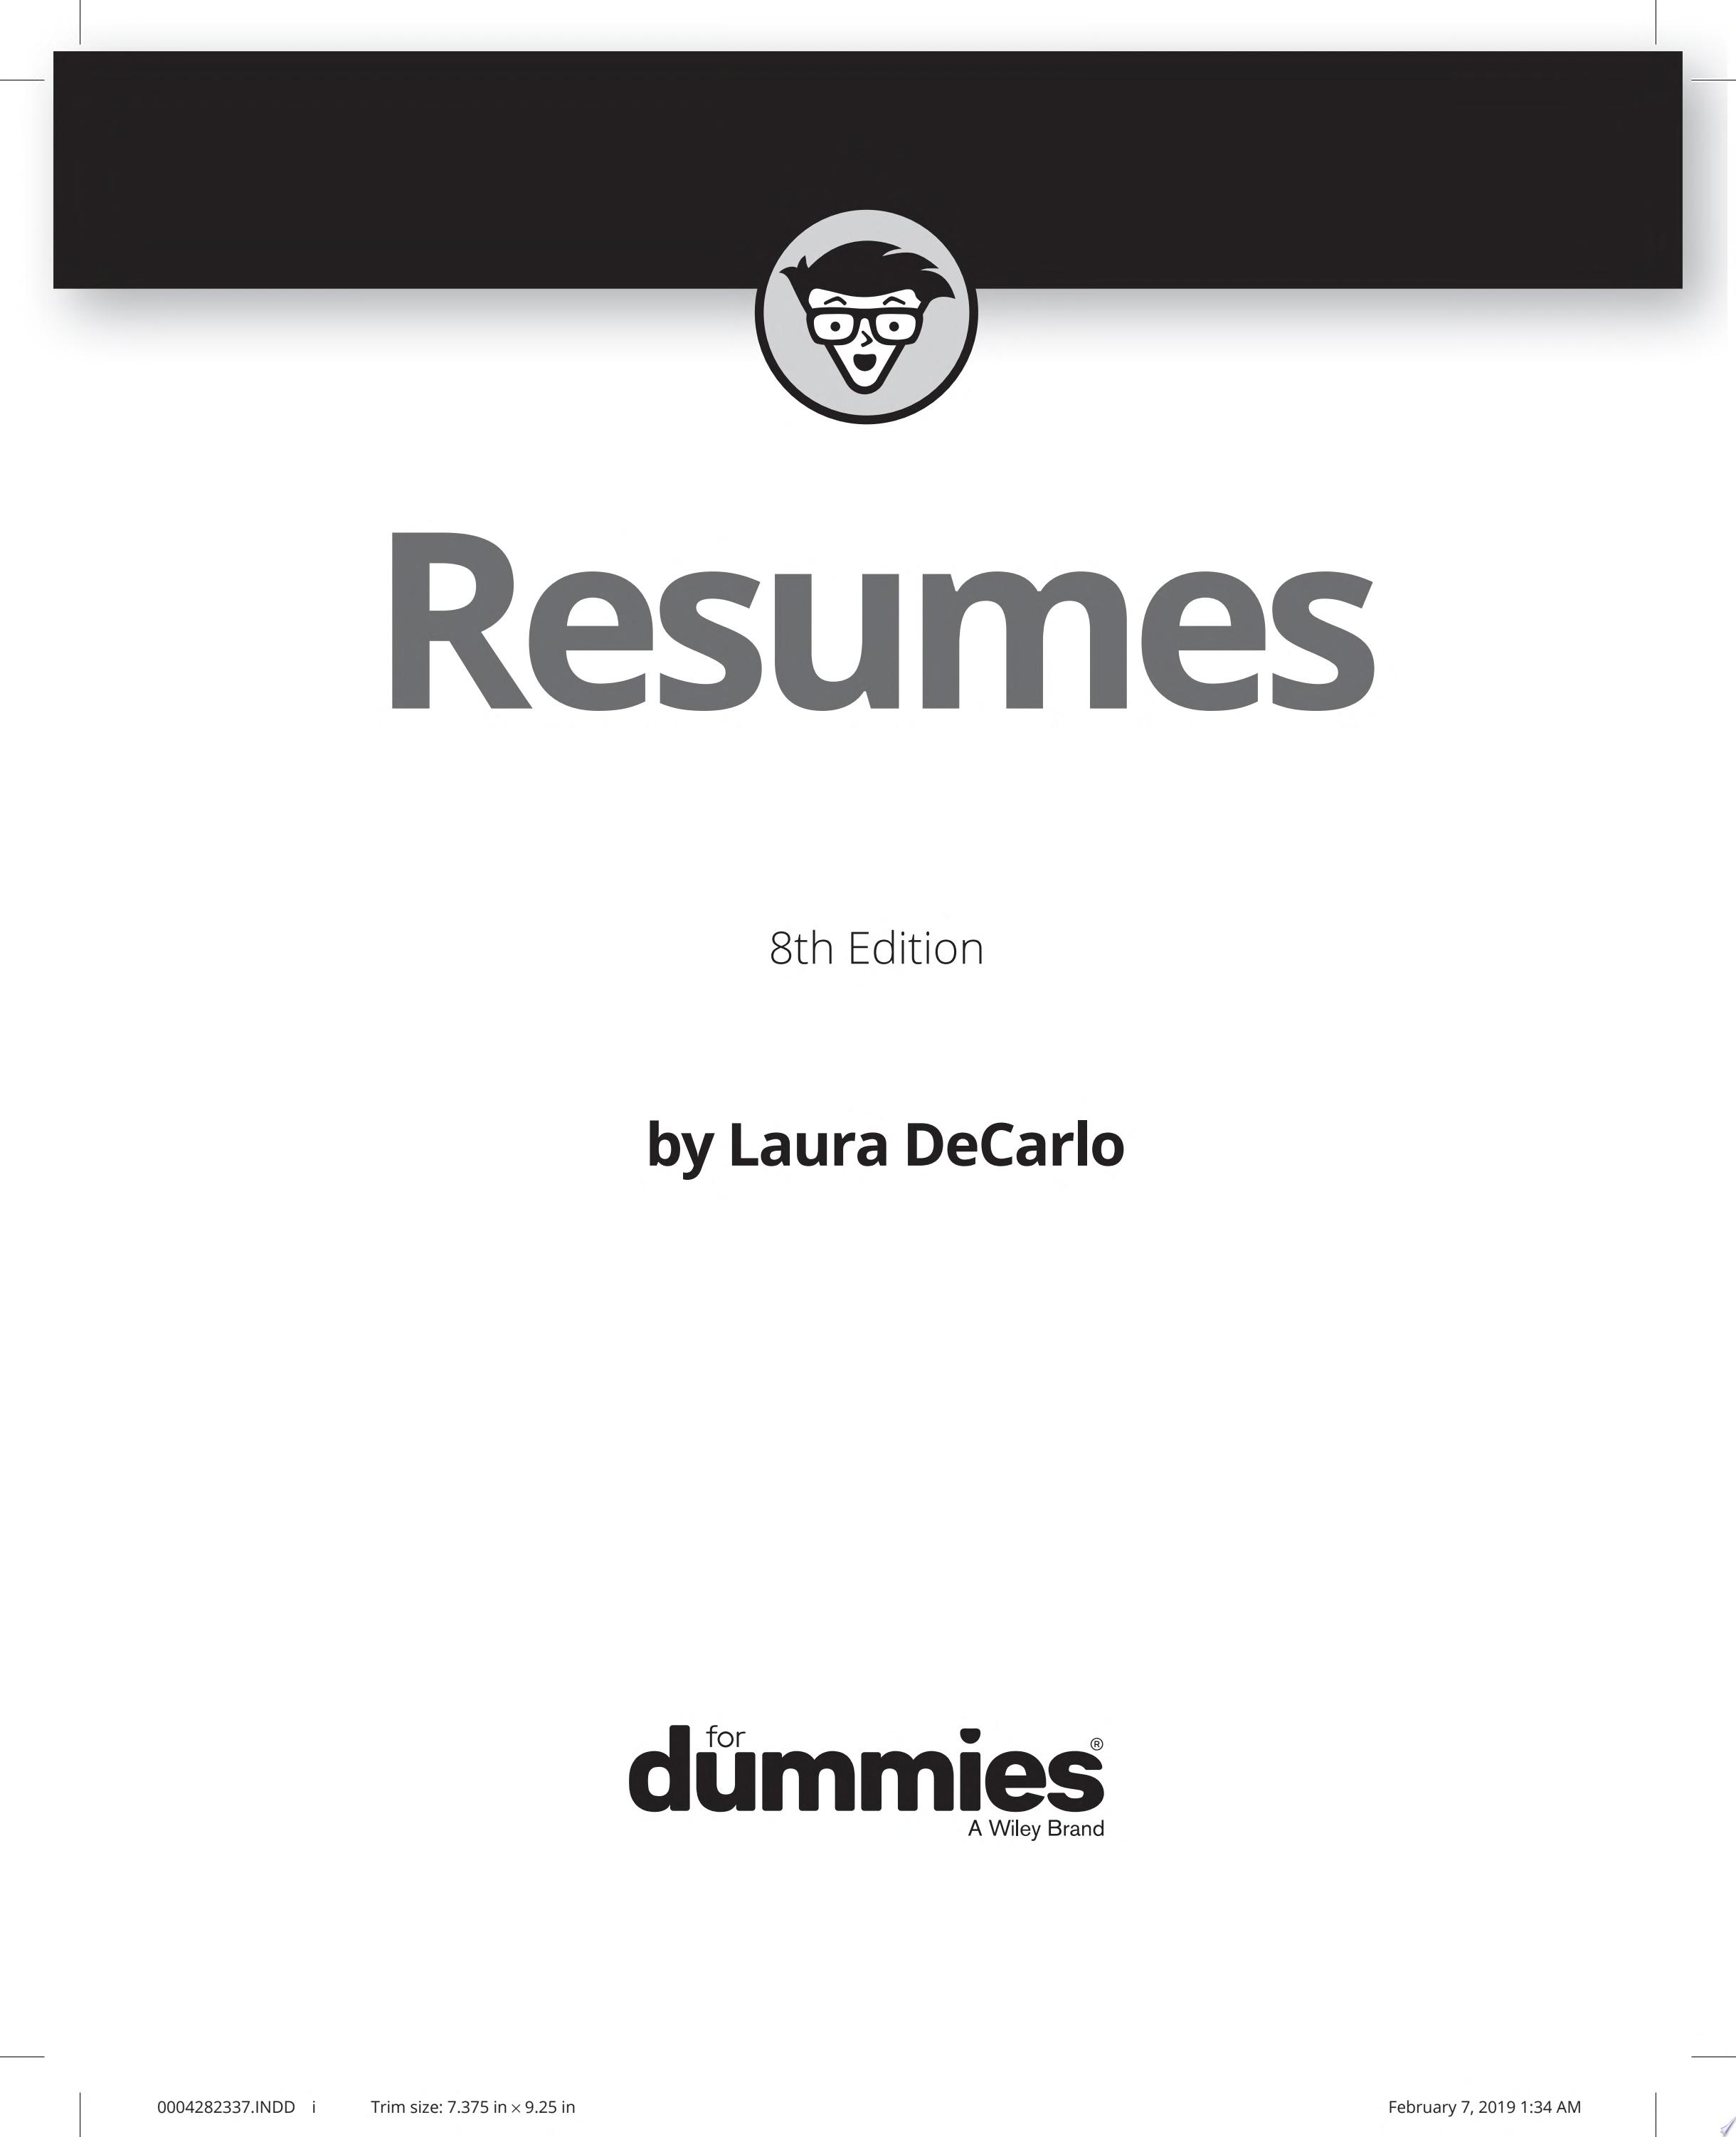 Image for "Resumes For Dummies"